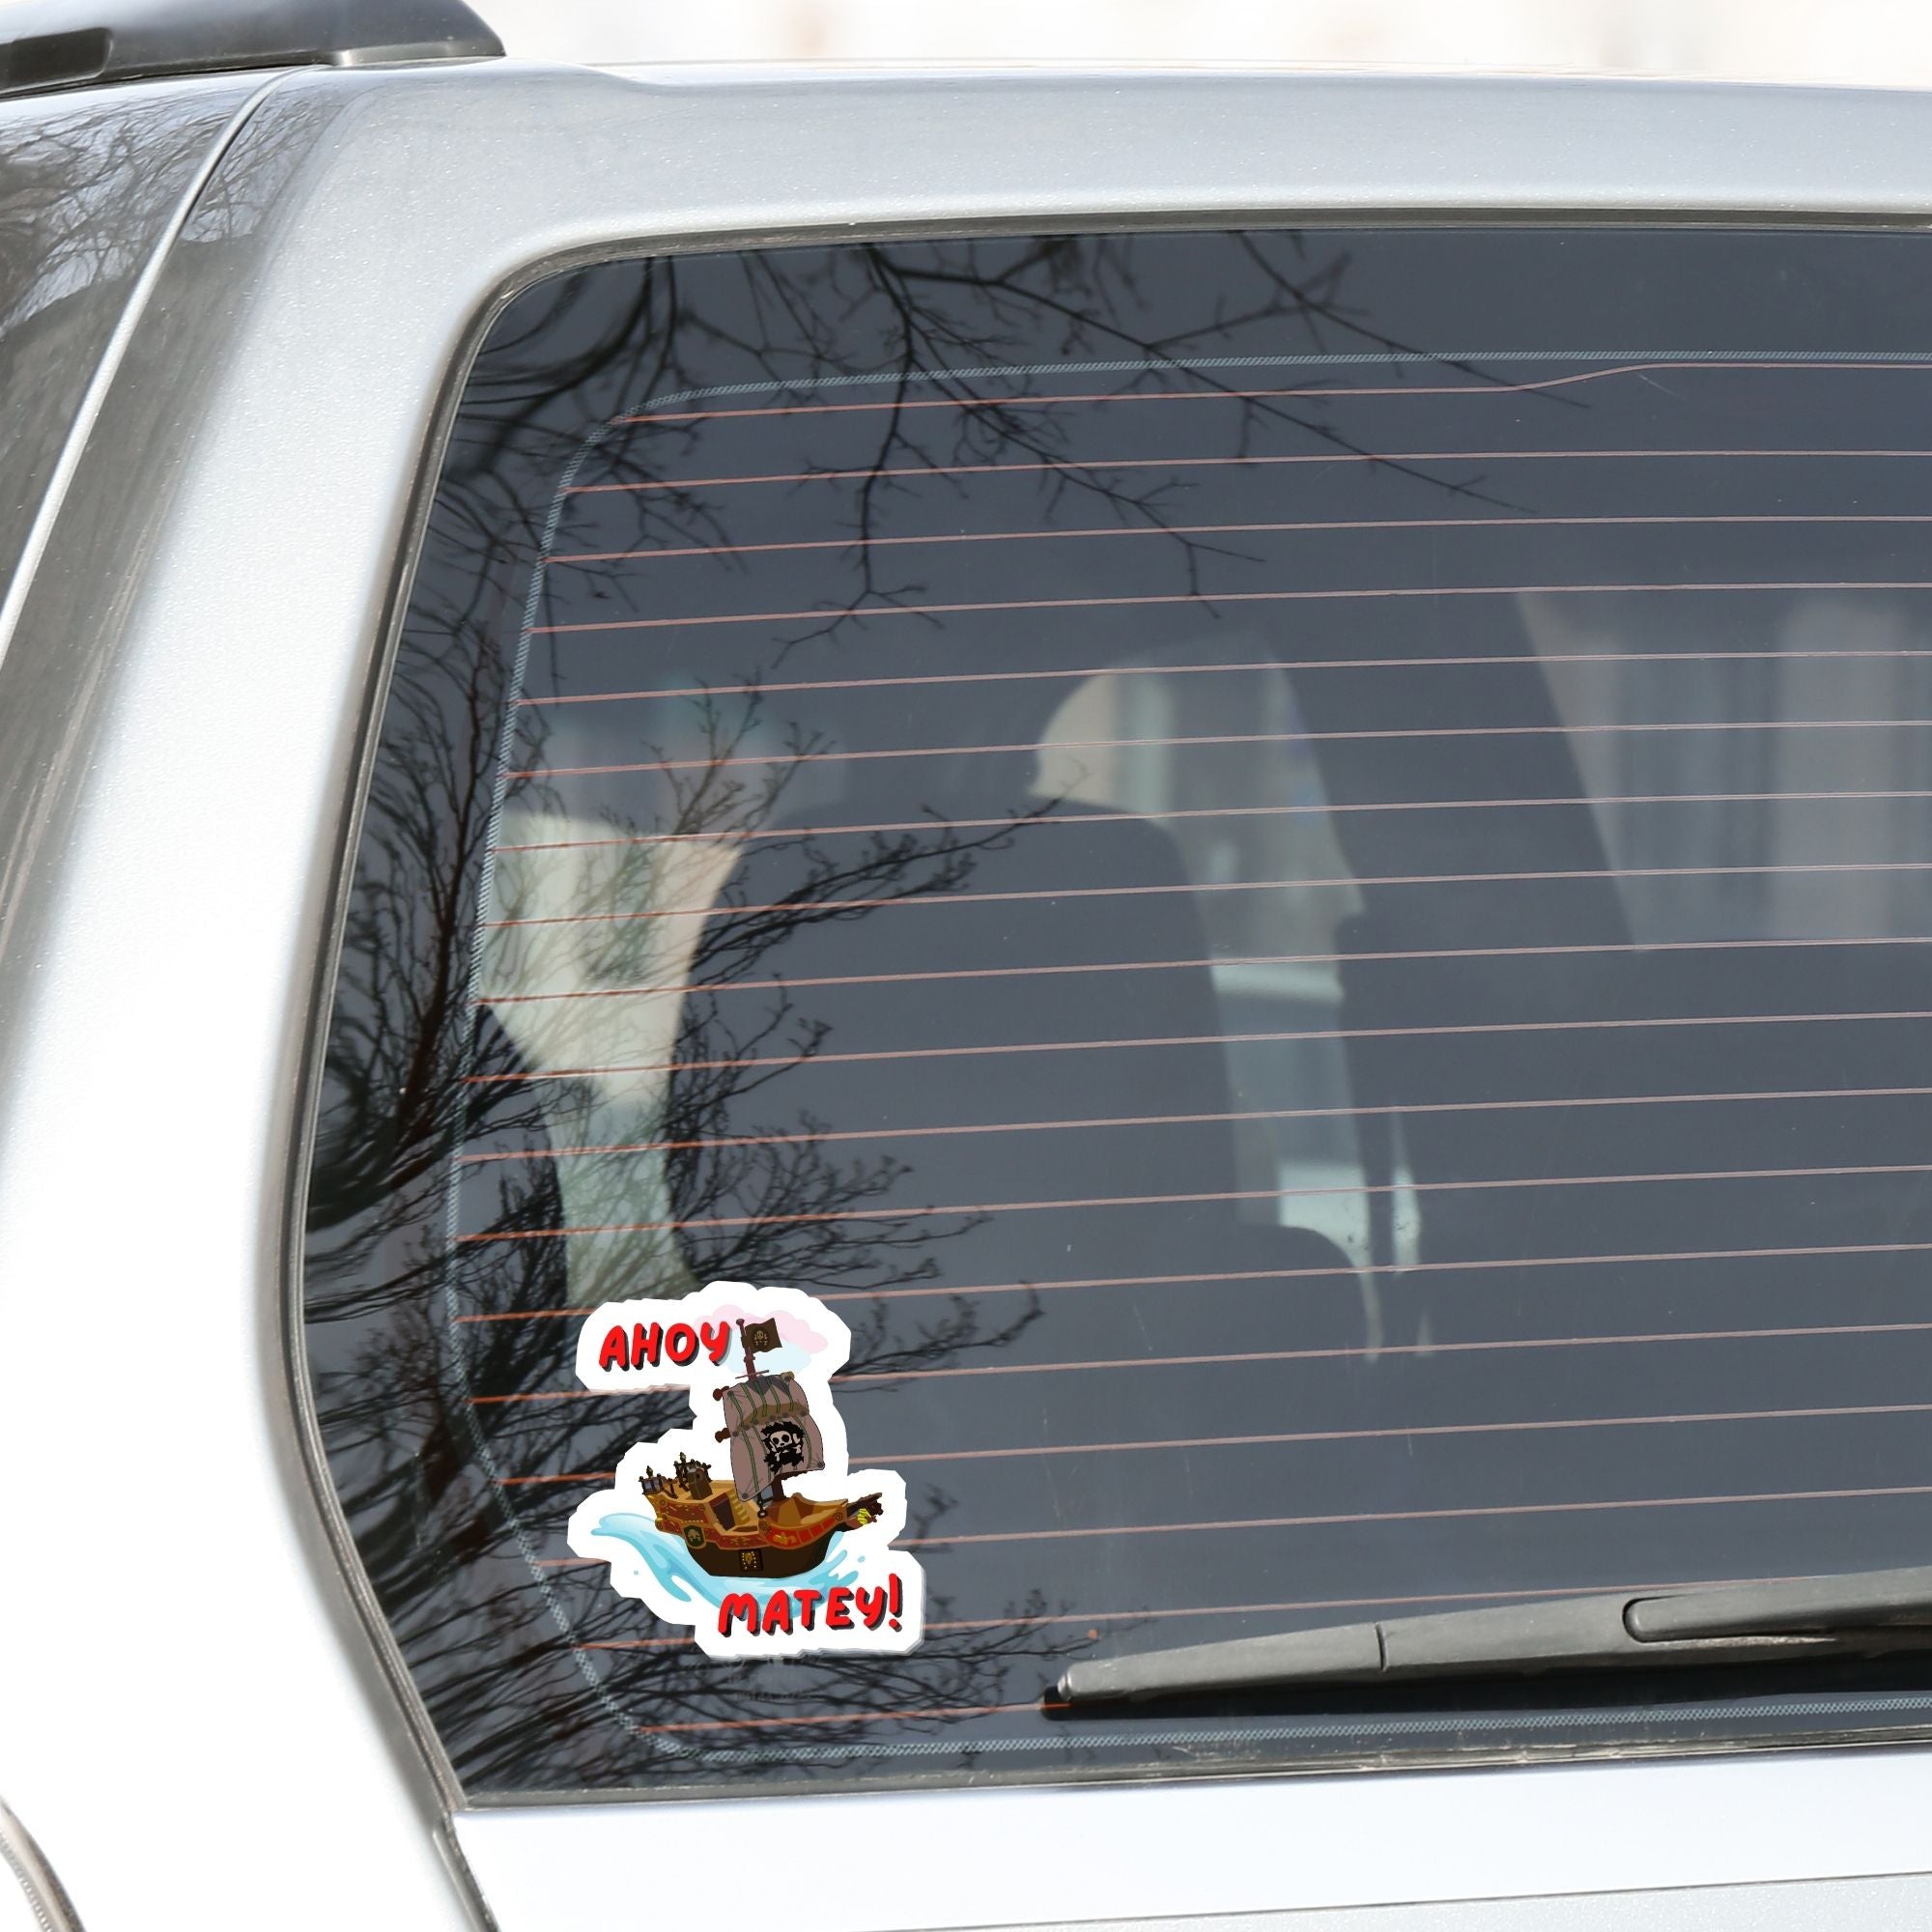 Hoist the main and prepare to board! This individual die-cut sticker is of a pirate ship under sail with the words "Ahoy Matey!" This image shows the pirate sticker on the back window of a car.